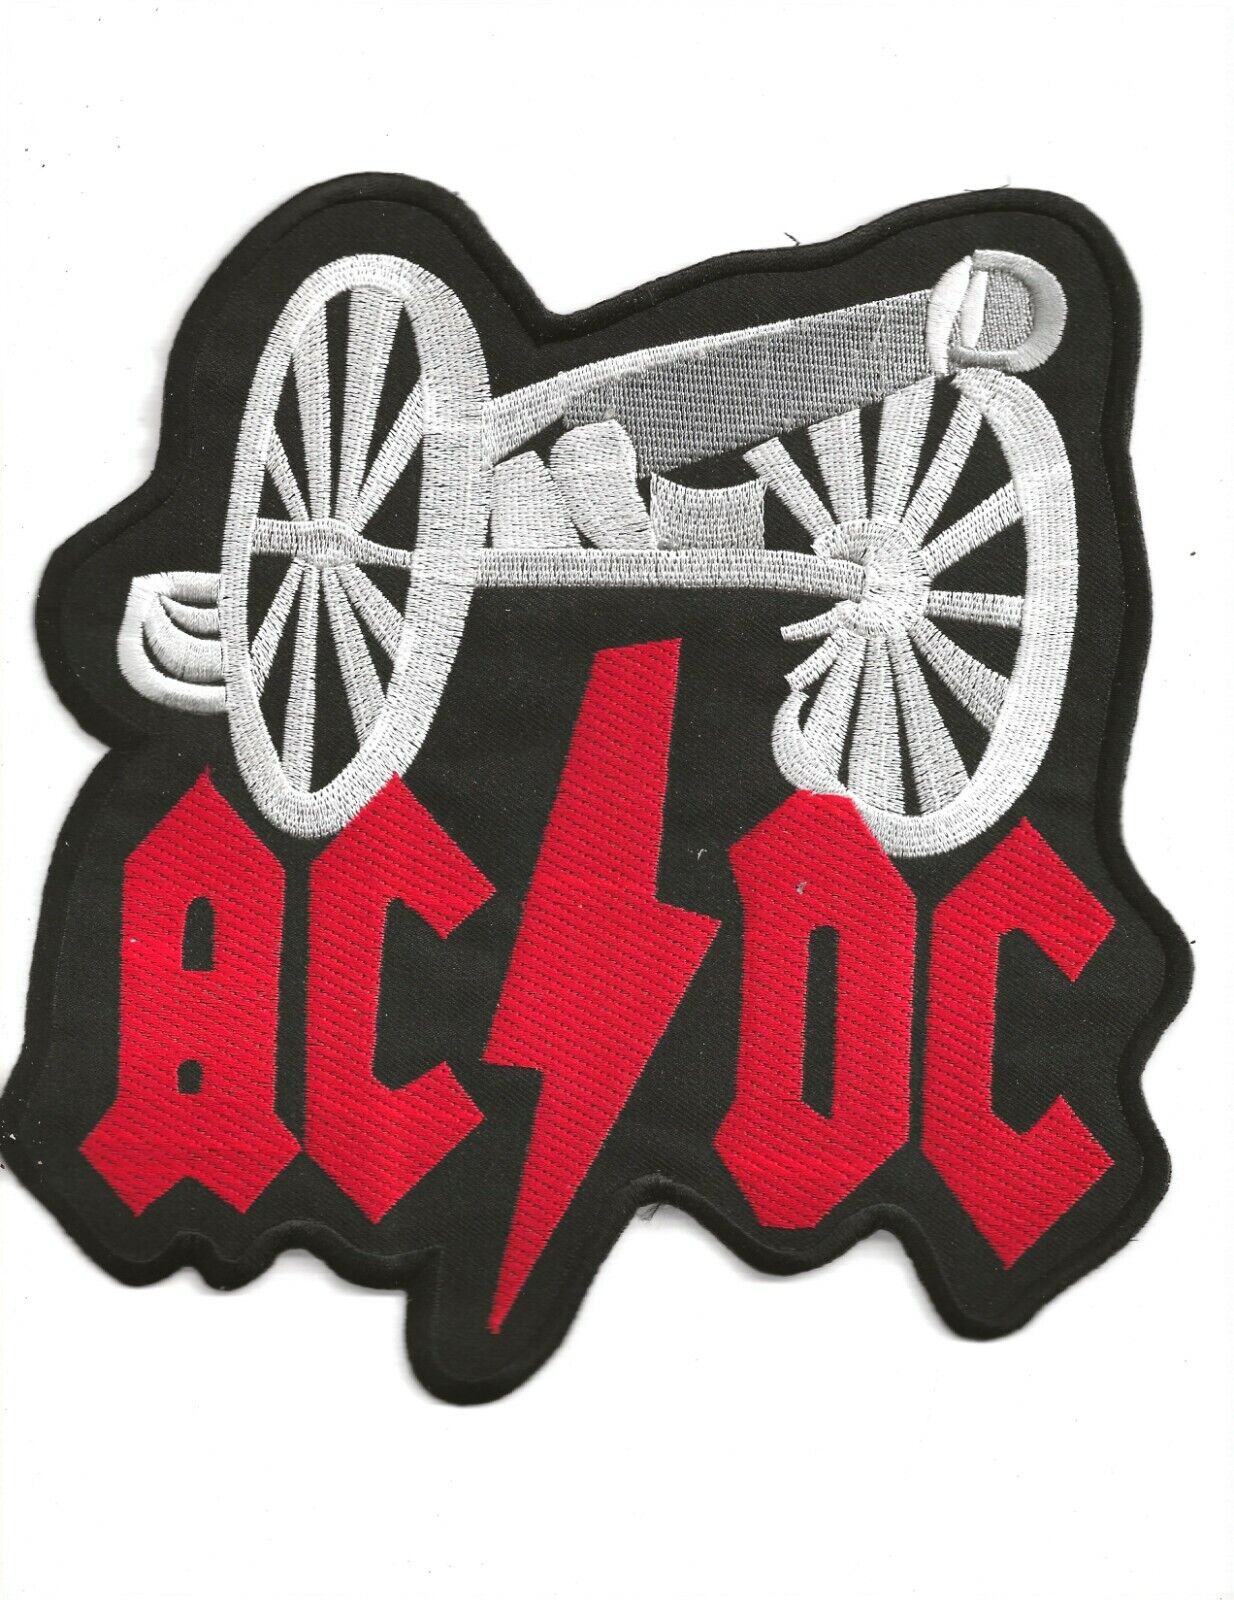 New 8 X 8 1/2 Inch Ac/dc Cannon Iron On Patch Free Shipping